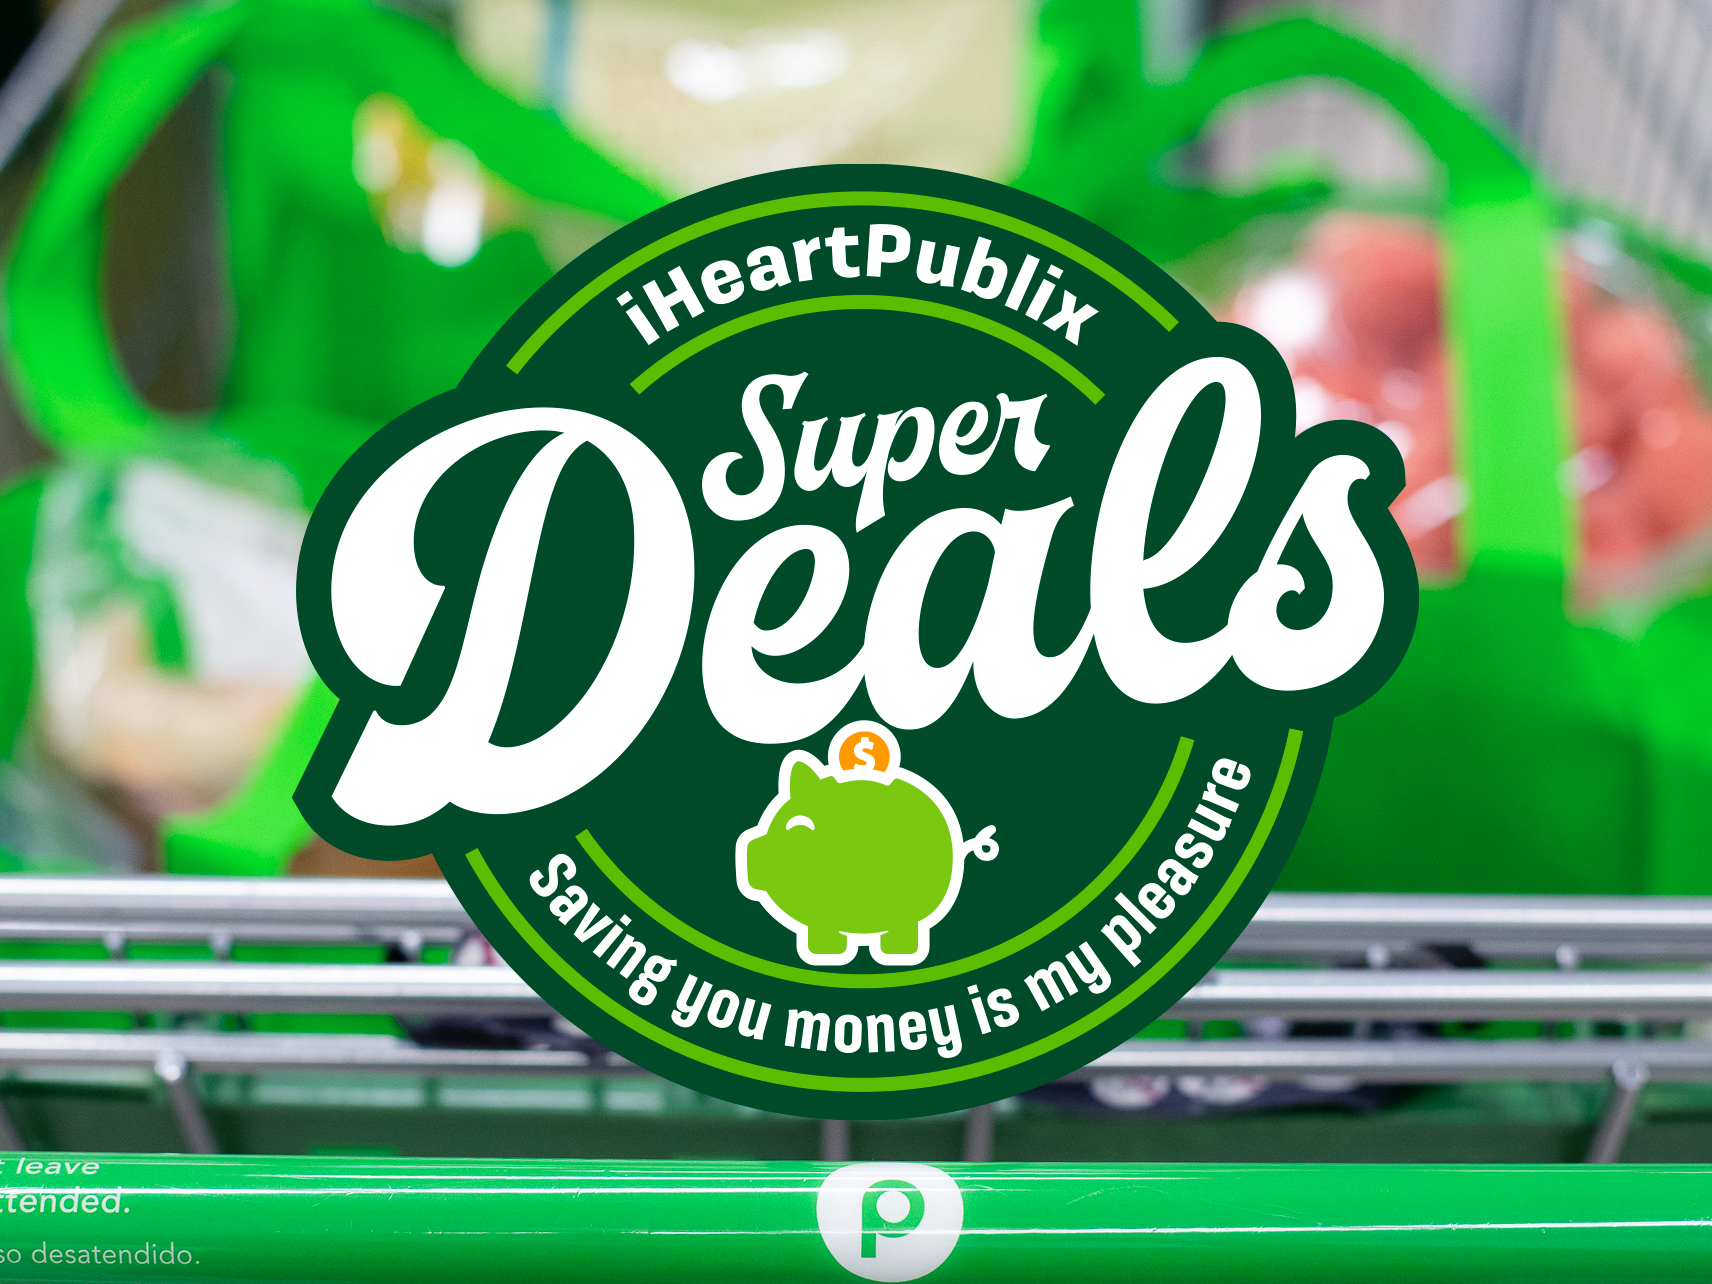 Publix Super Deals Week Of 8/25 to 8/31 (8/24 to 8/30 For Some)